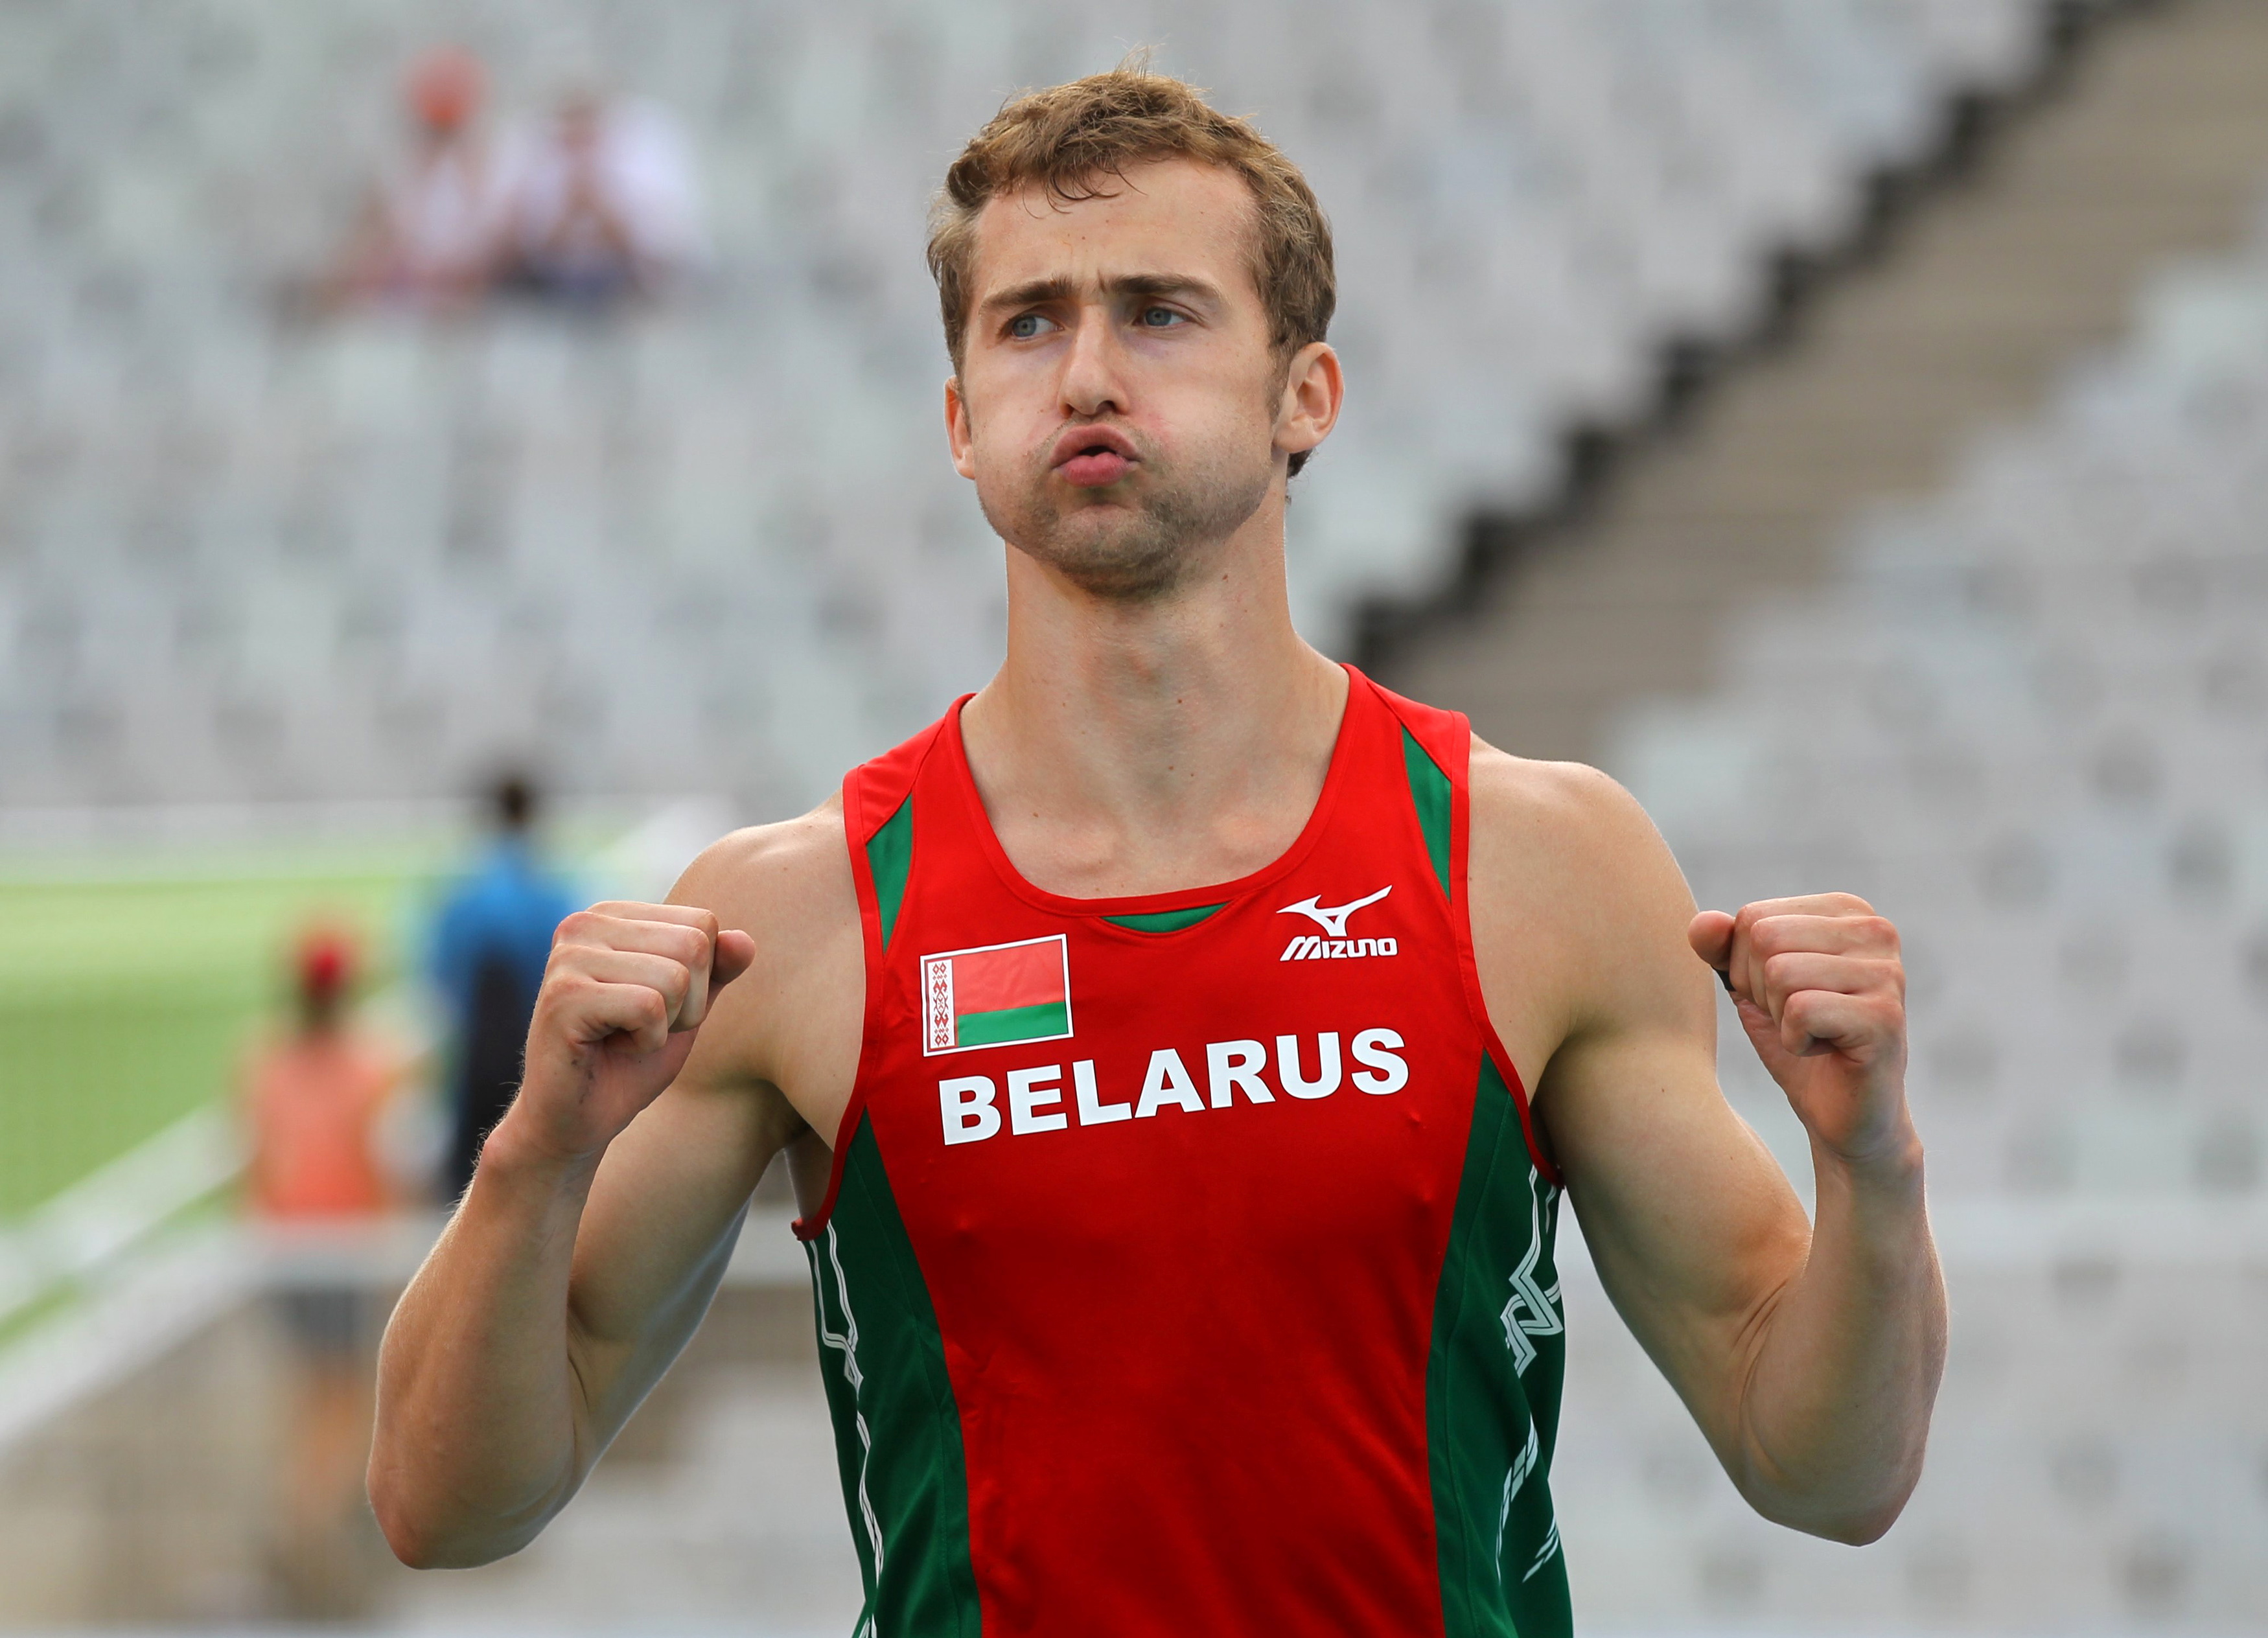 Krauchanka of Belarus reacts during  the pole vault event of the men's decathlon at the at the European Athletics Championships in Barcelona